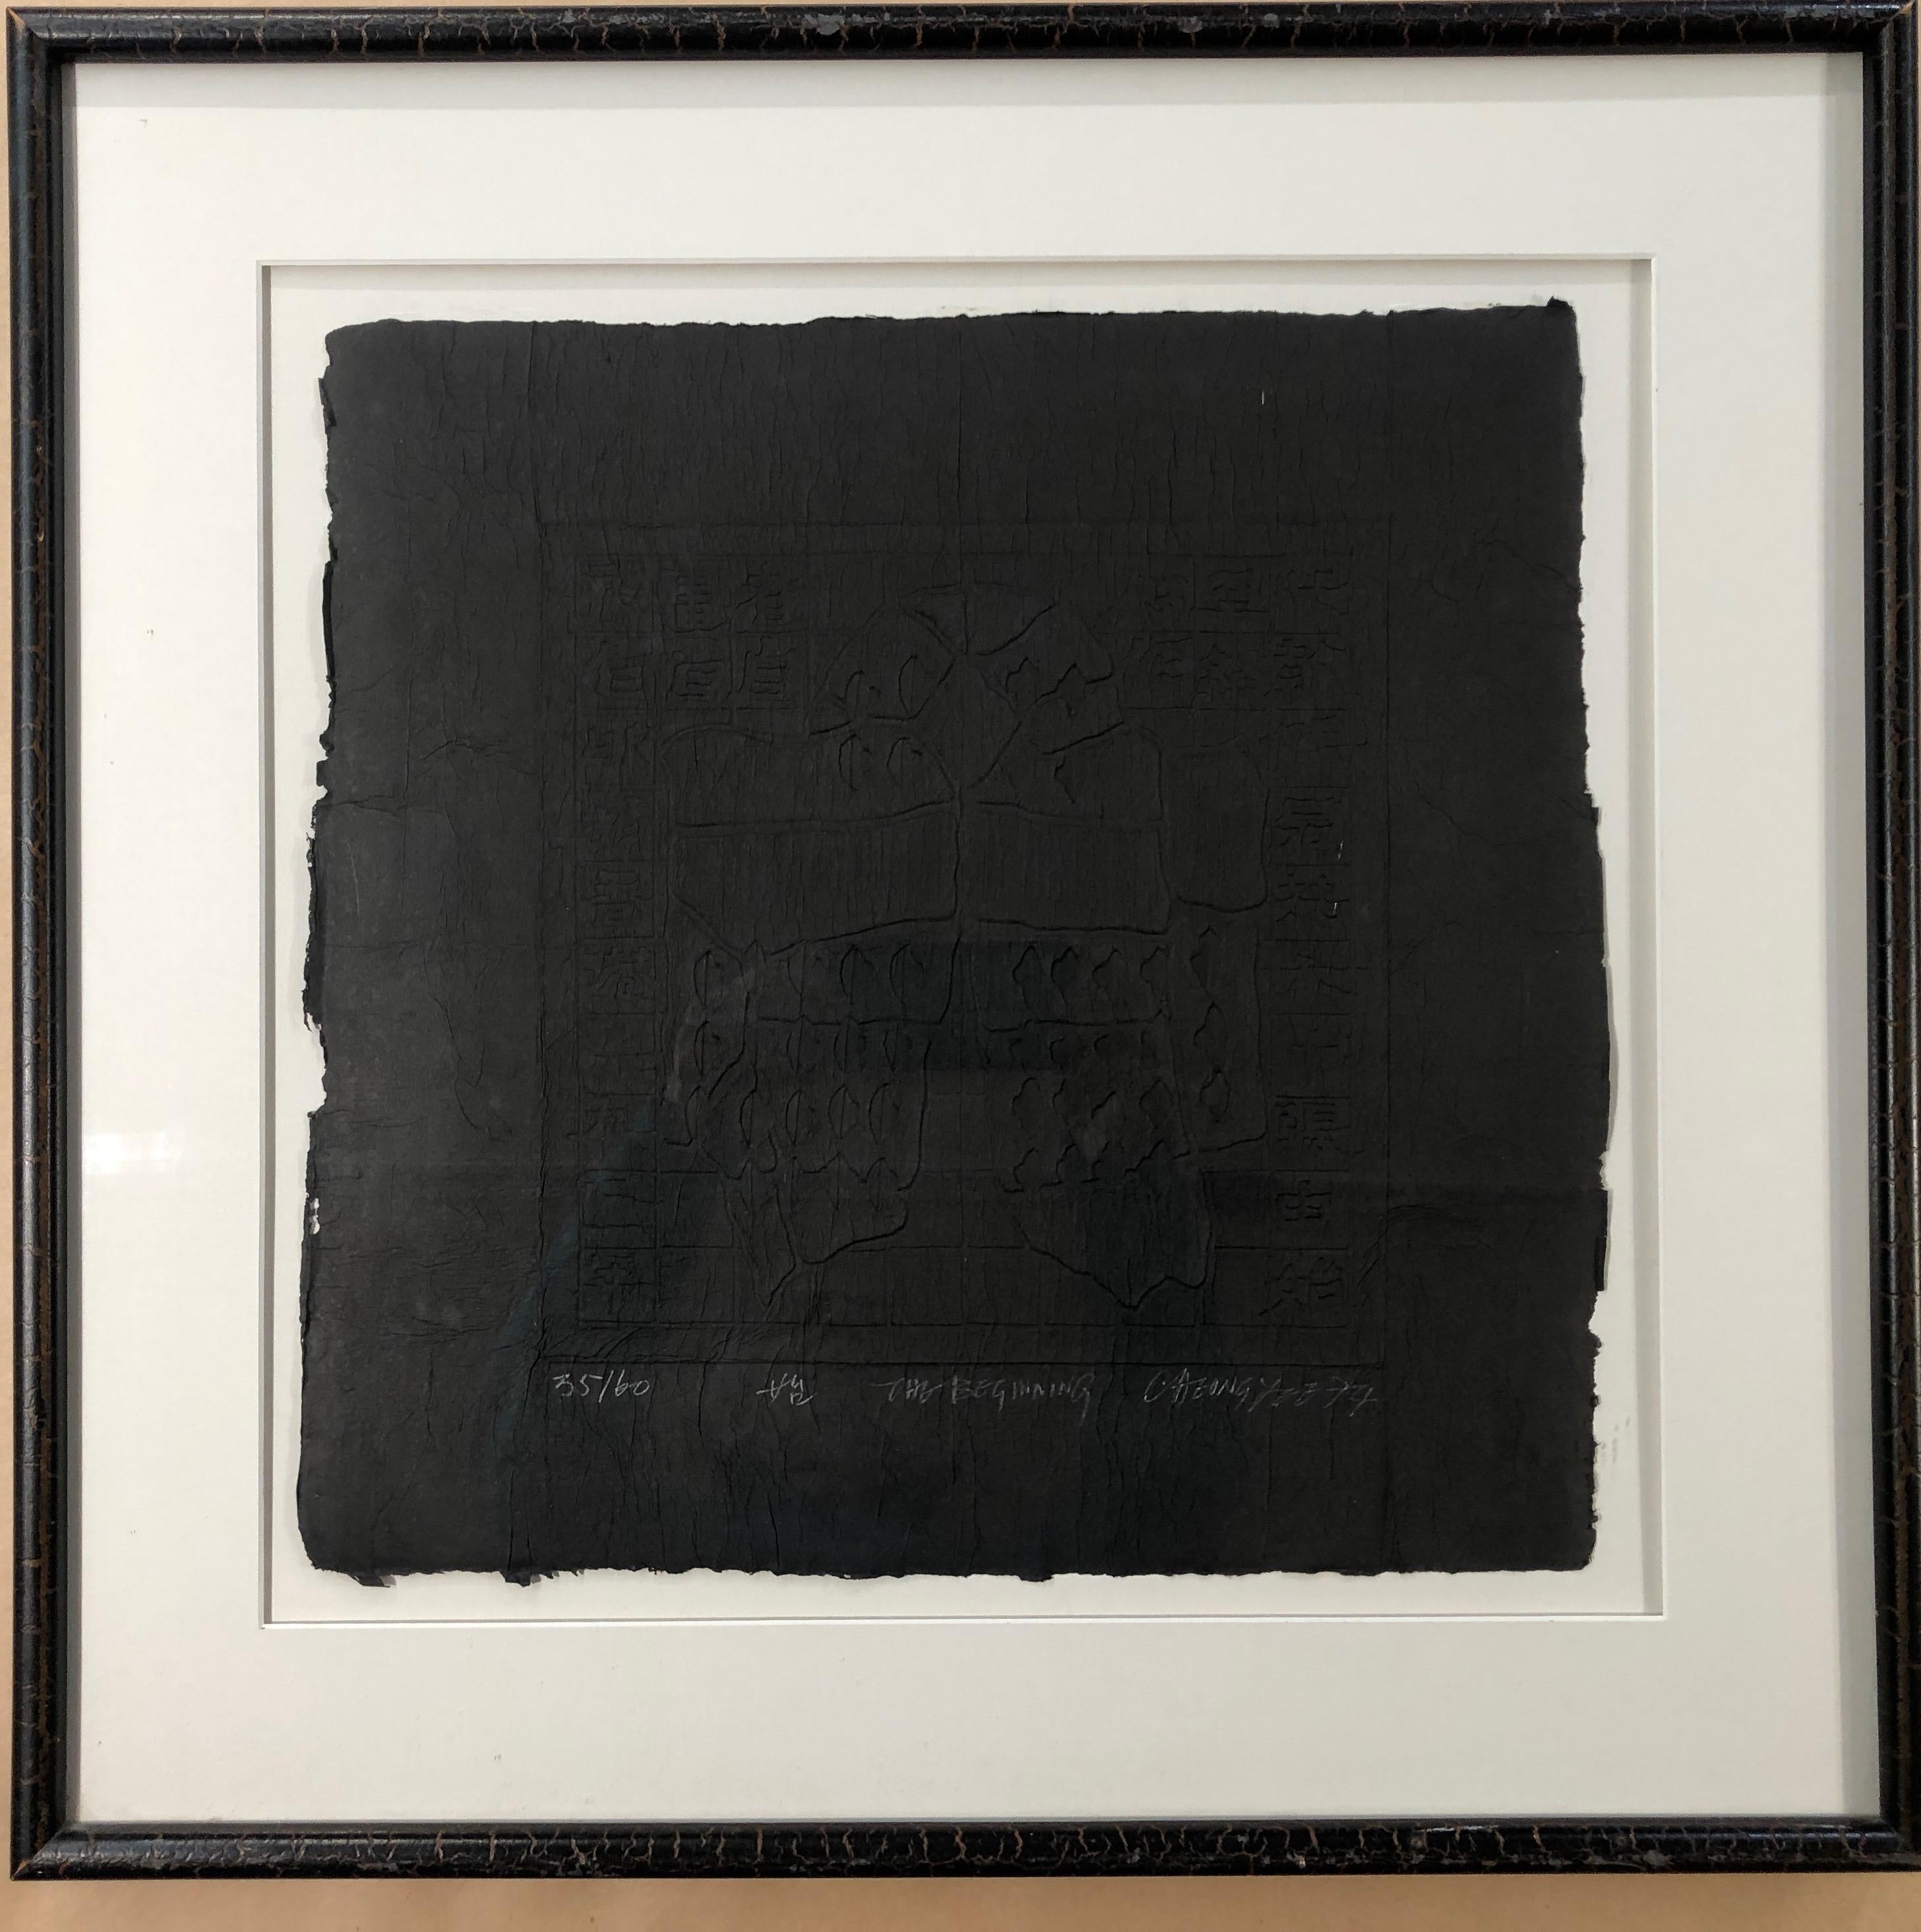 The Beginning, 2021, cast paper, framed sculpture, black, Chinese text